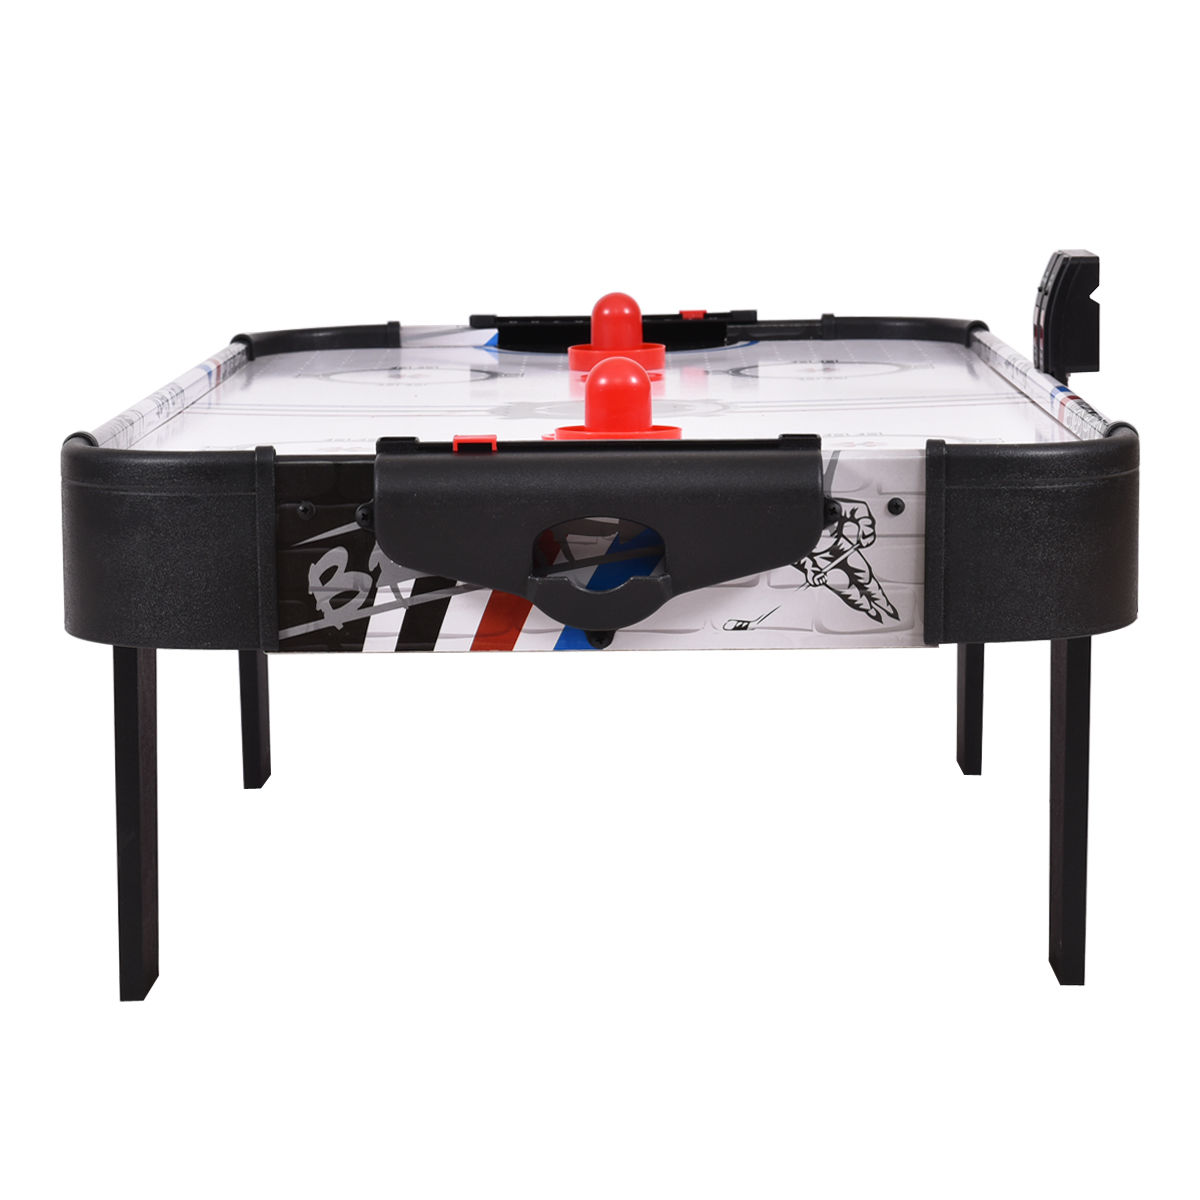 Costway 42''Air Powered Hockey Table Game Room Indoor Sport Electronic Scoring 2 Pushers - image 5 of 9